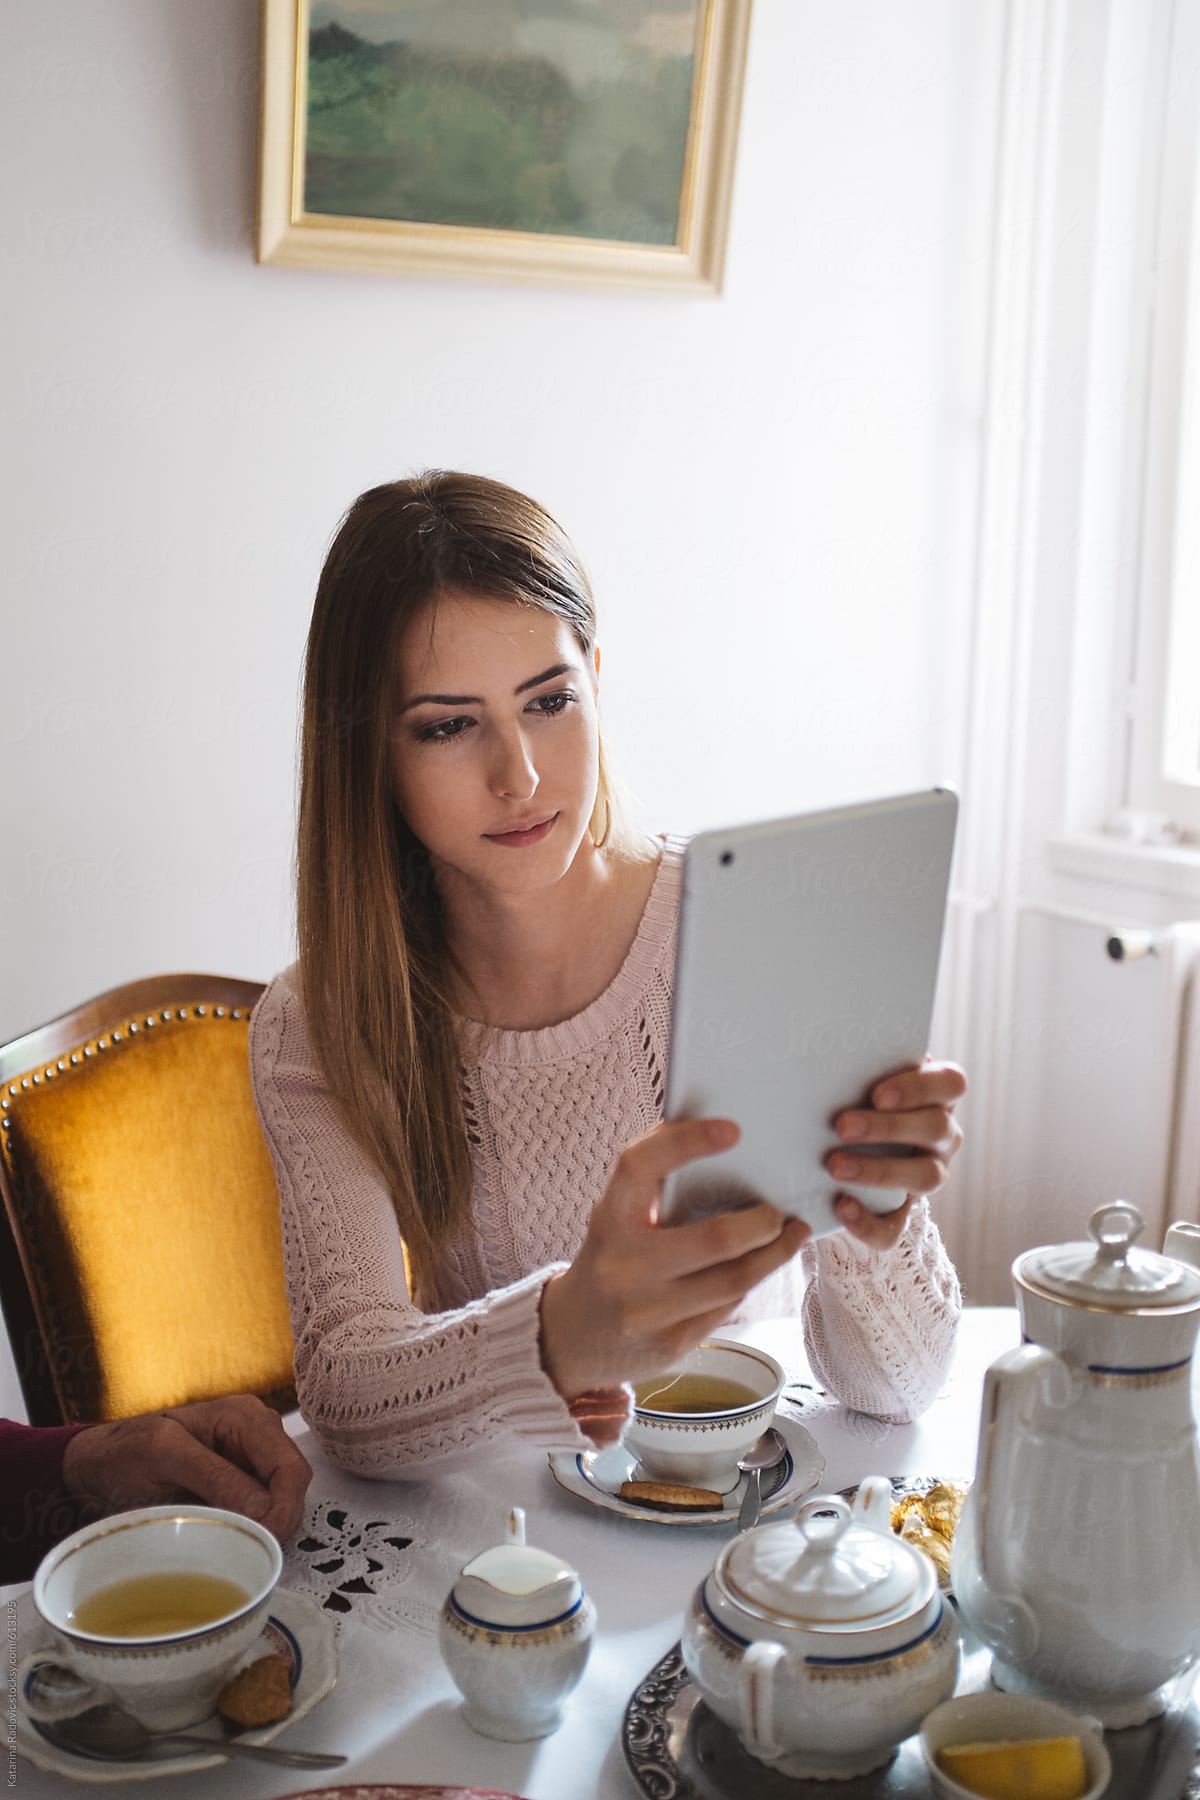 Woman Using Tablet Computer While Having Tea Time